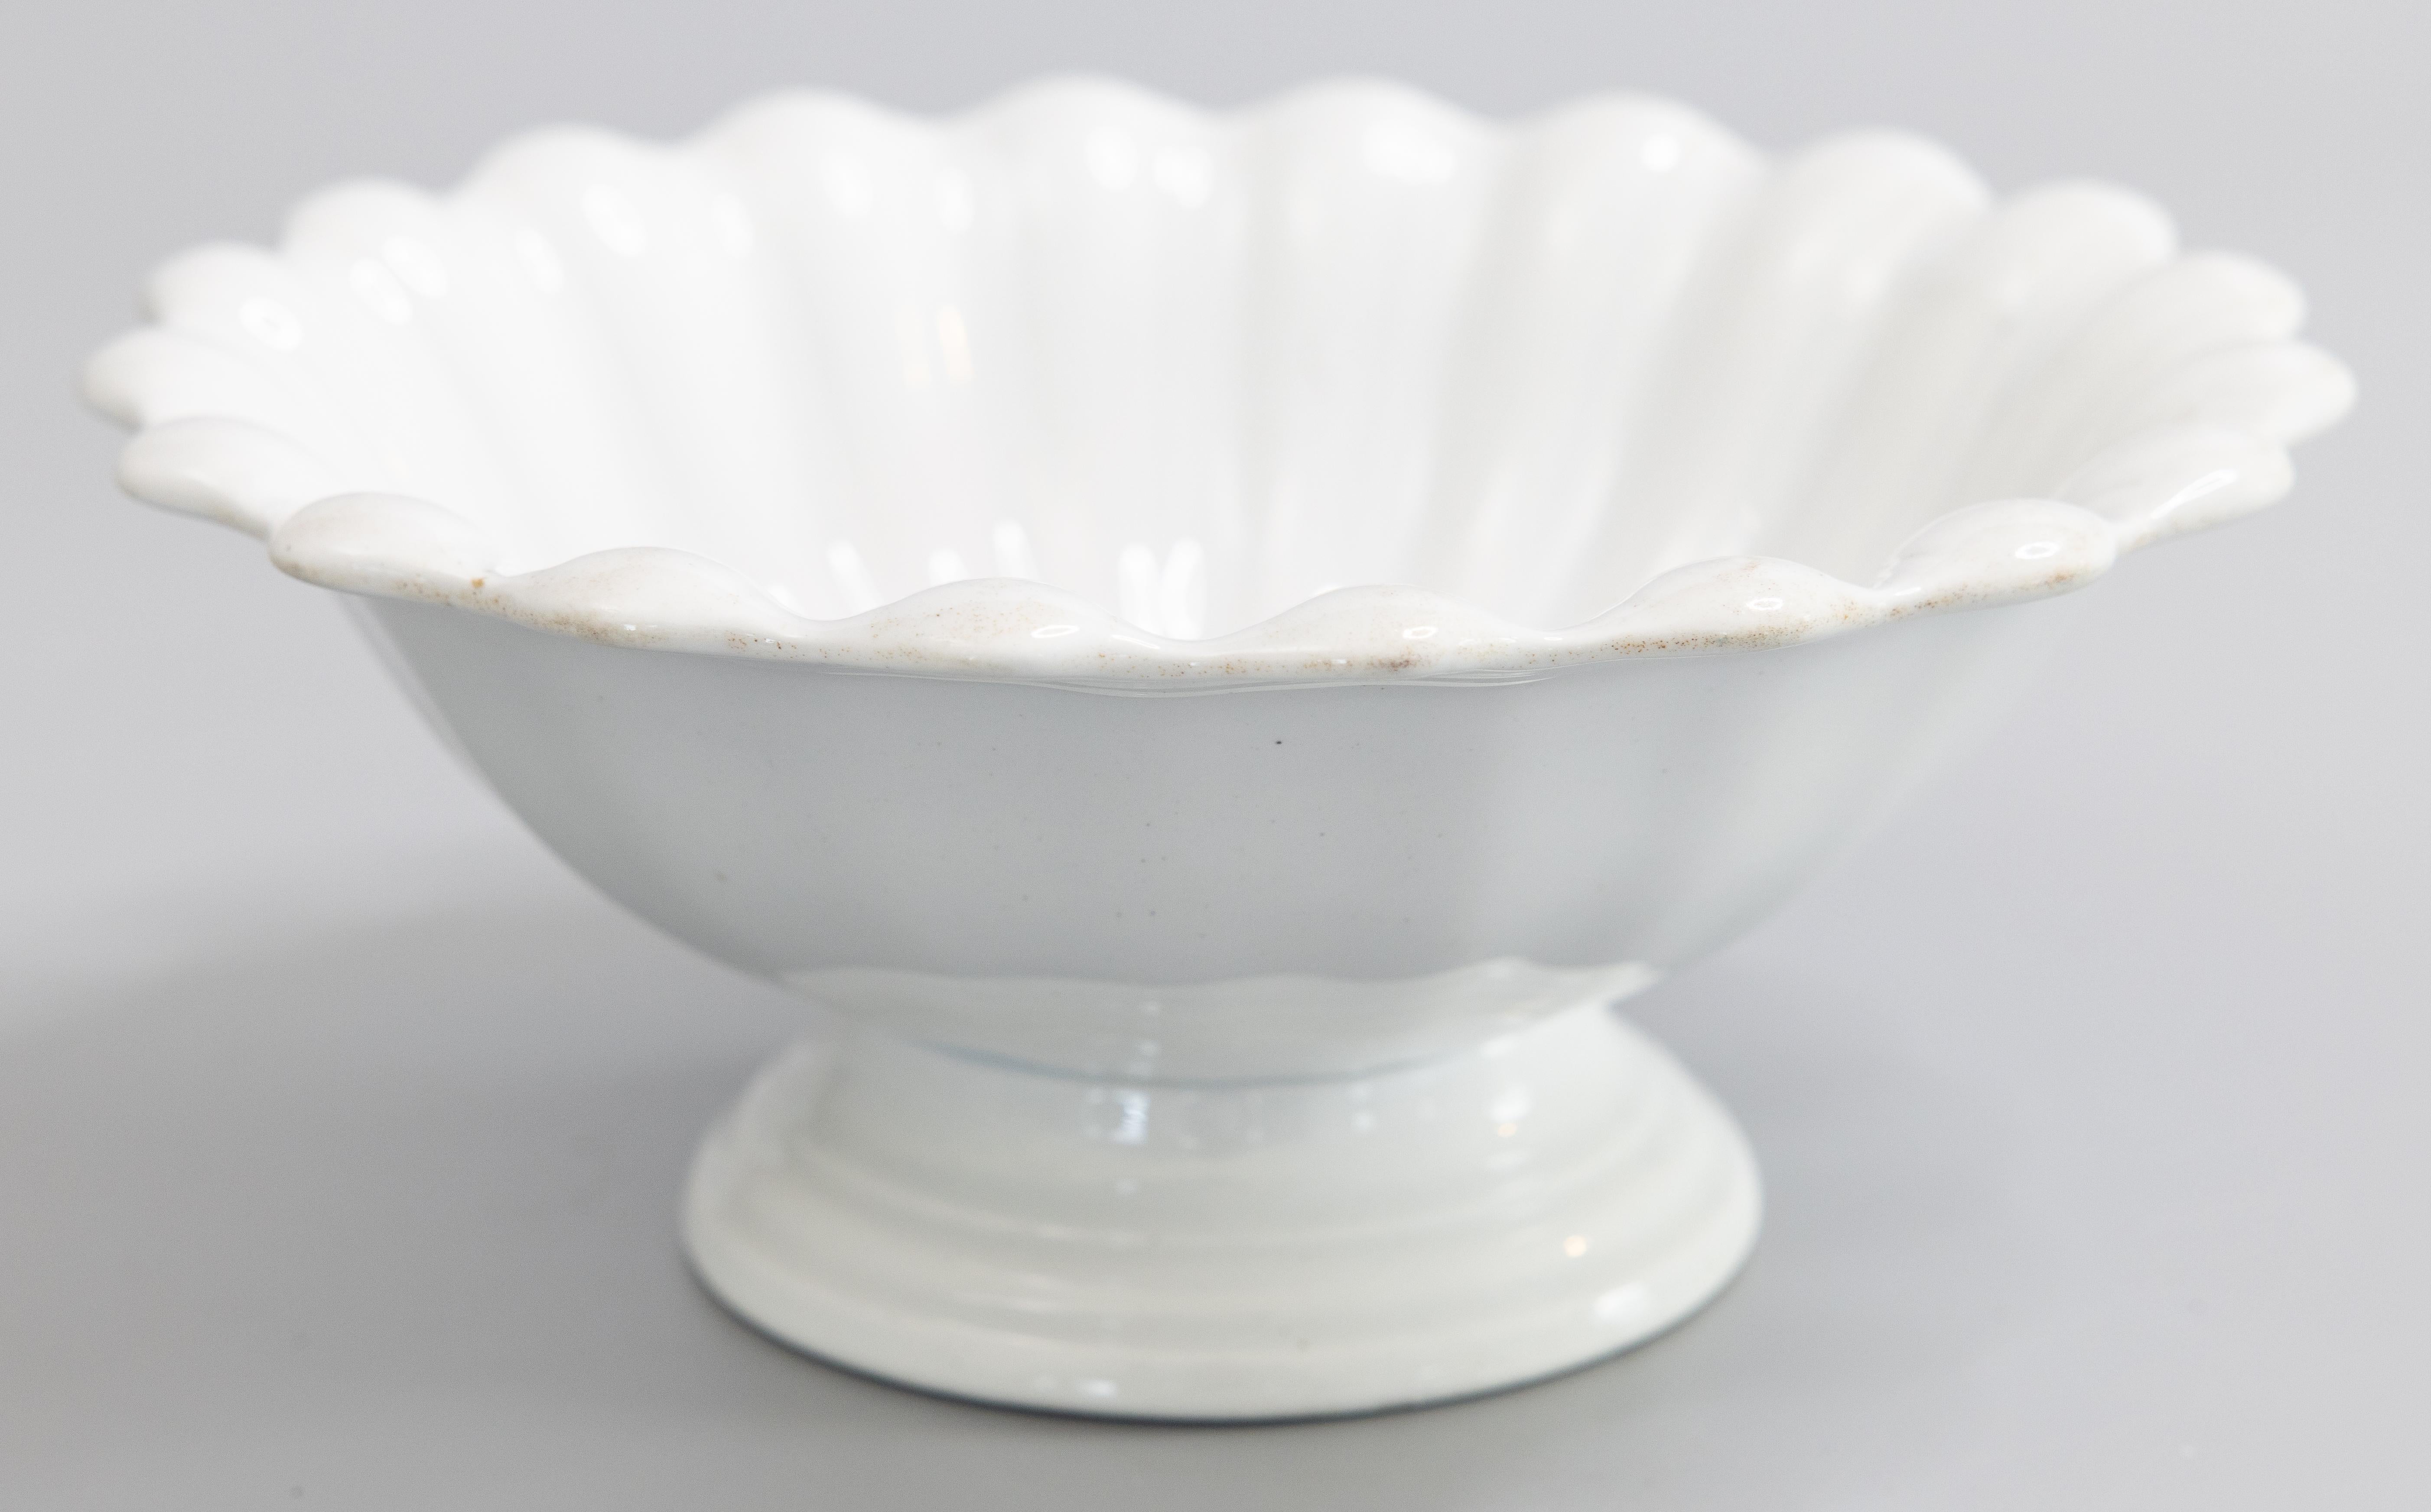 A beautiful antique white ironstone footed bowl with a lovely fluted design by Bridgwood & Clarke, Stoke-on-Trent, England, circa 1860. Impressed maker's mark on reverse. This would be a wonderful addition to an ironstone collection and would look